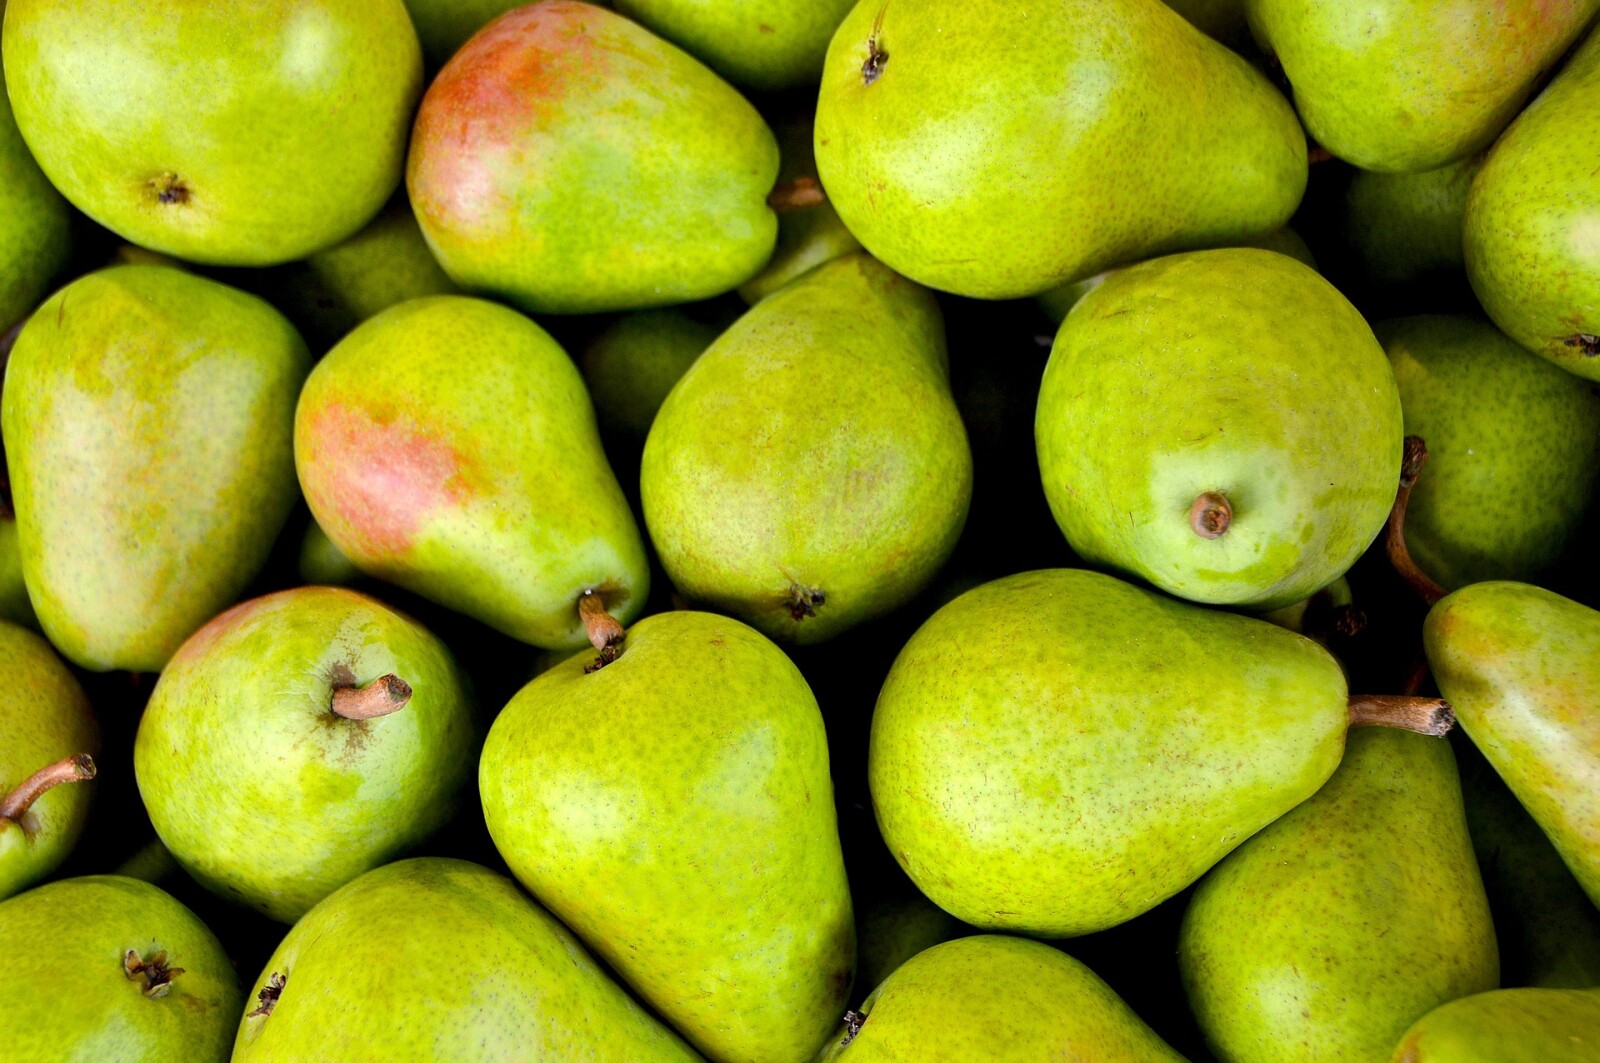 How to dehydrate pears